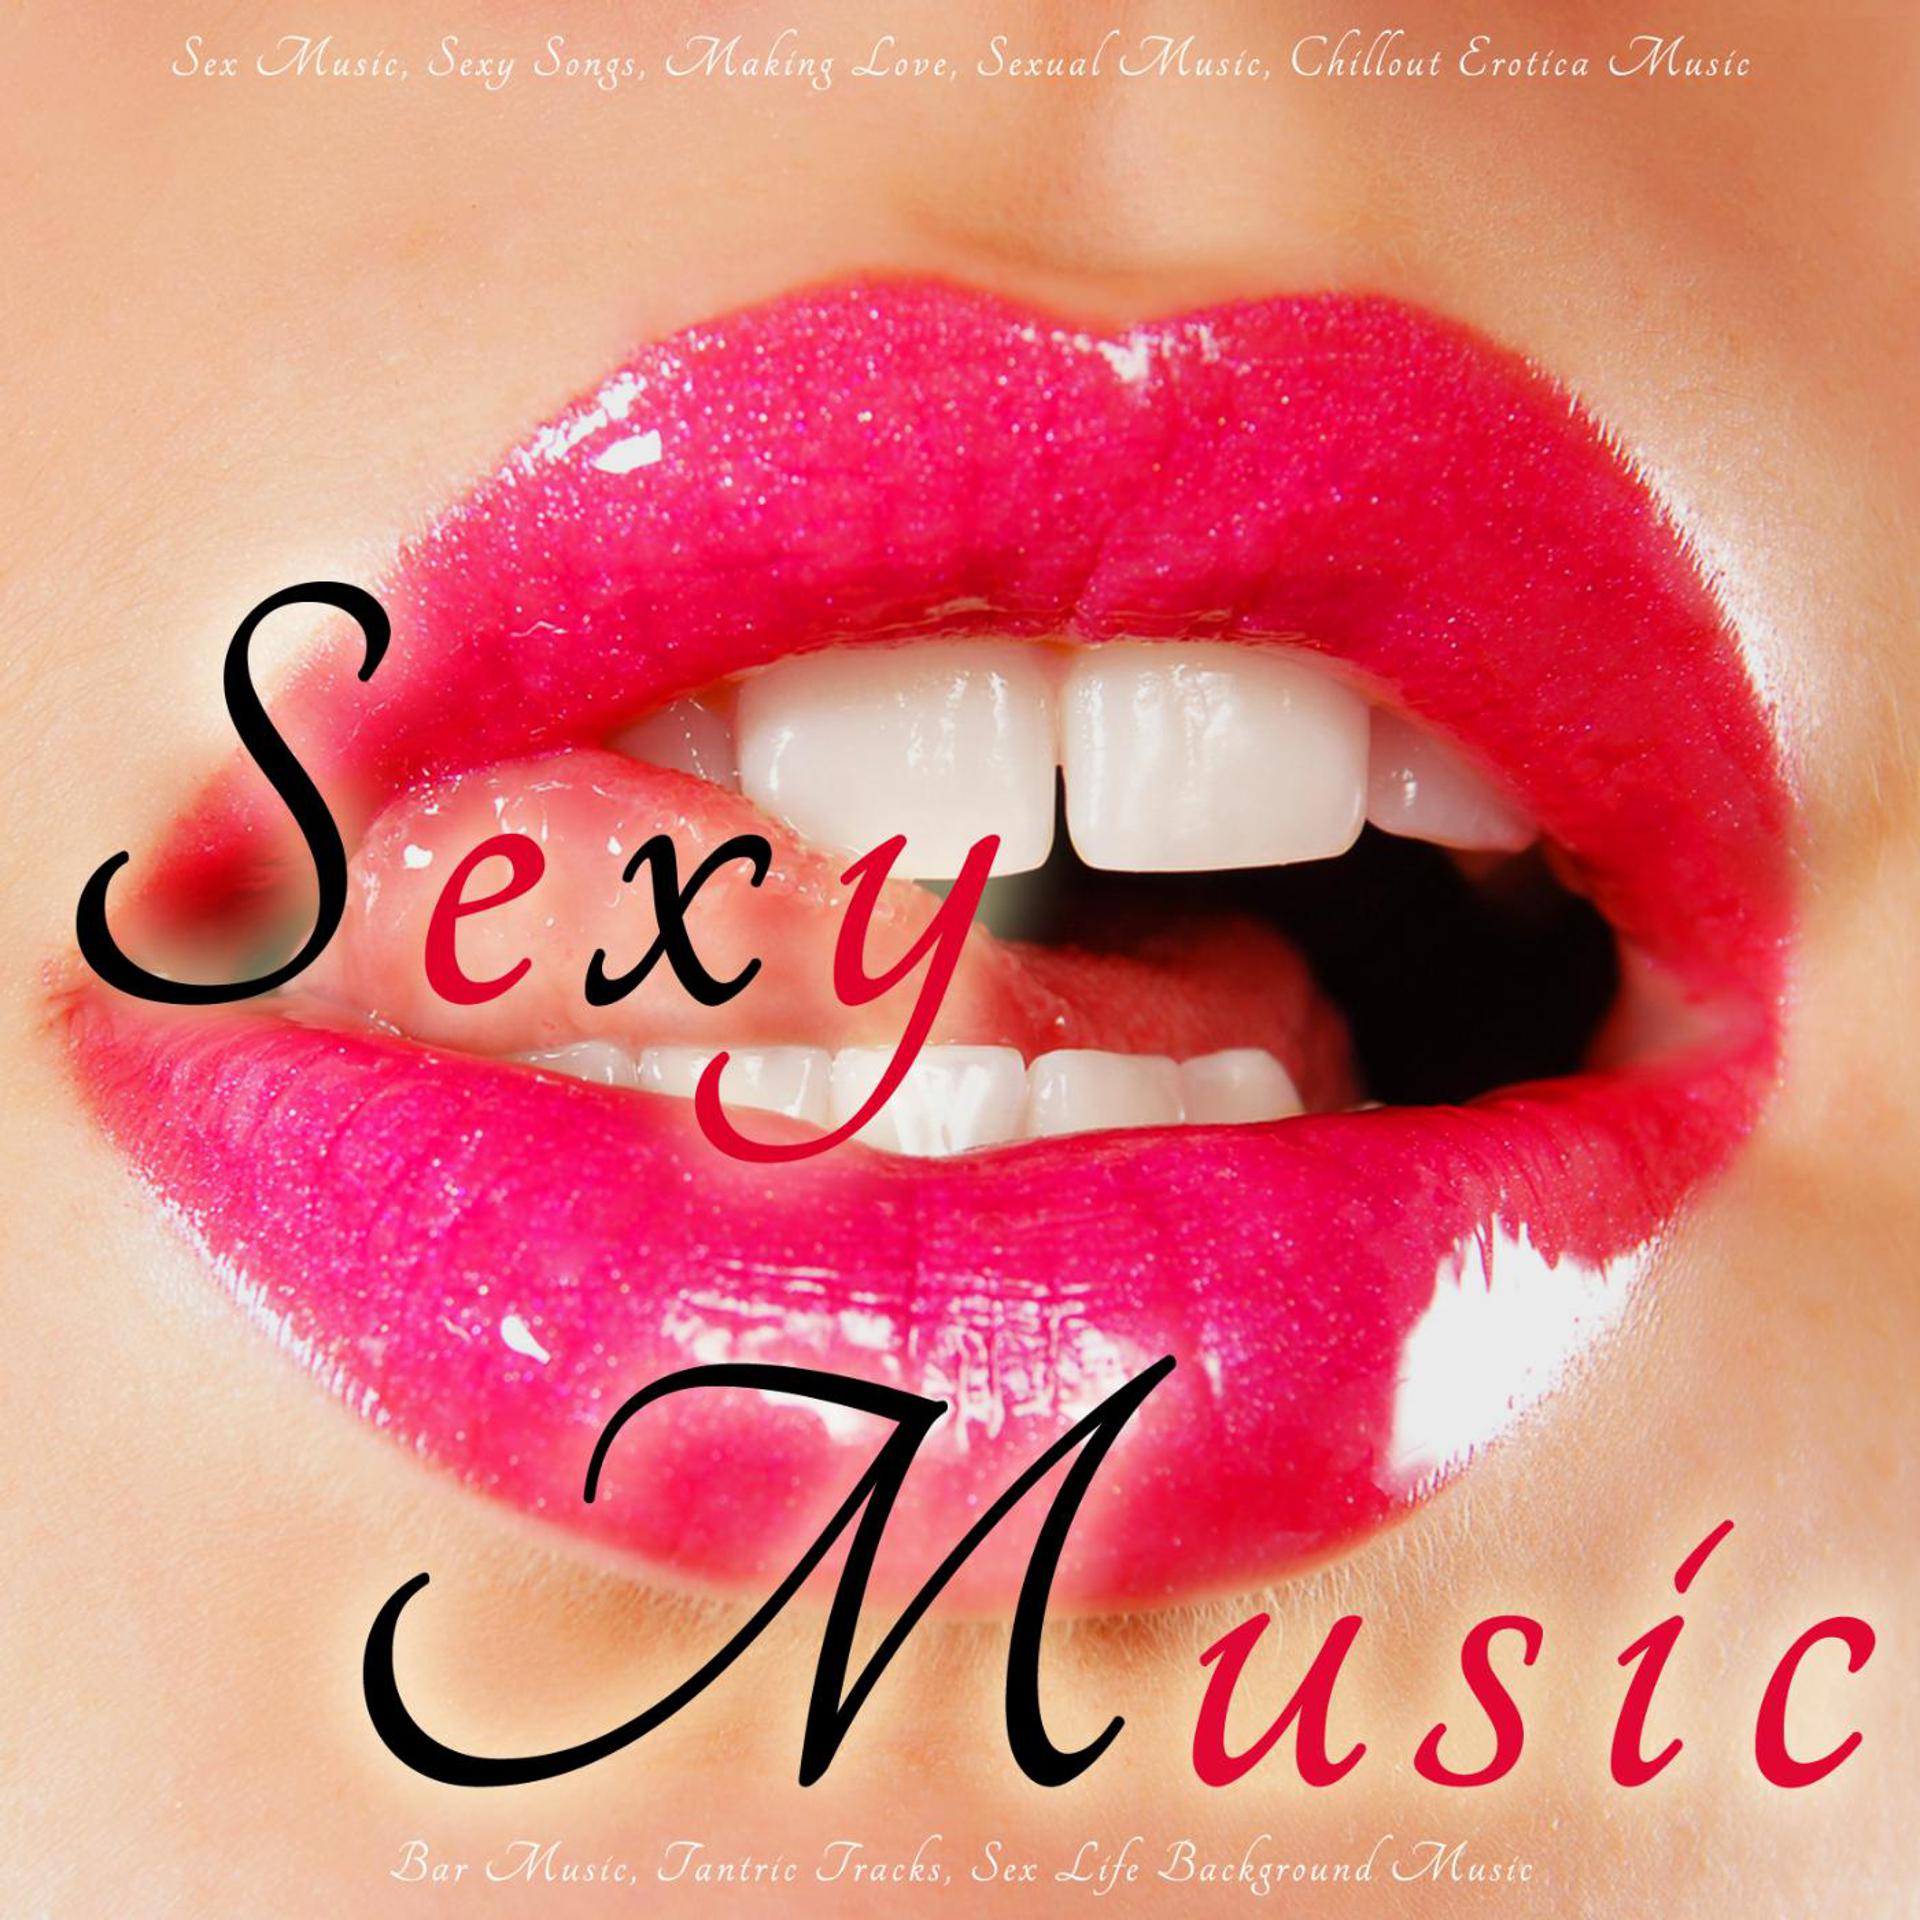 Постер альбома Sex Music, Sexy Songs, Making Love, Sexual Music, Chillout Erotica Music, Bar Music, Tantric Tracks, Sex Life Background Music